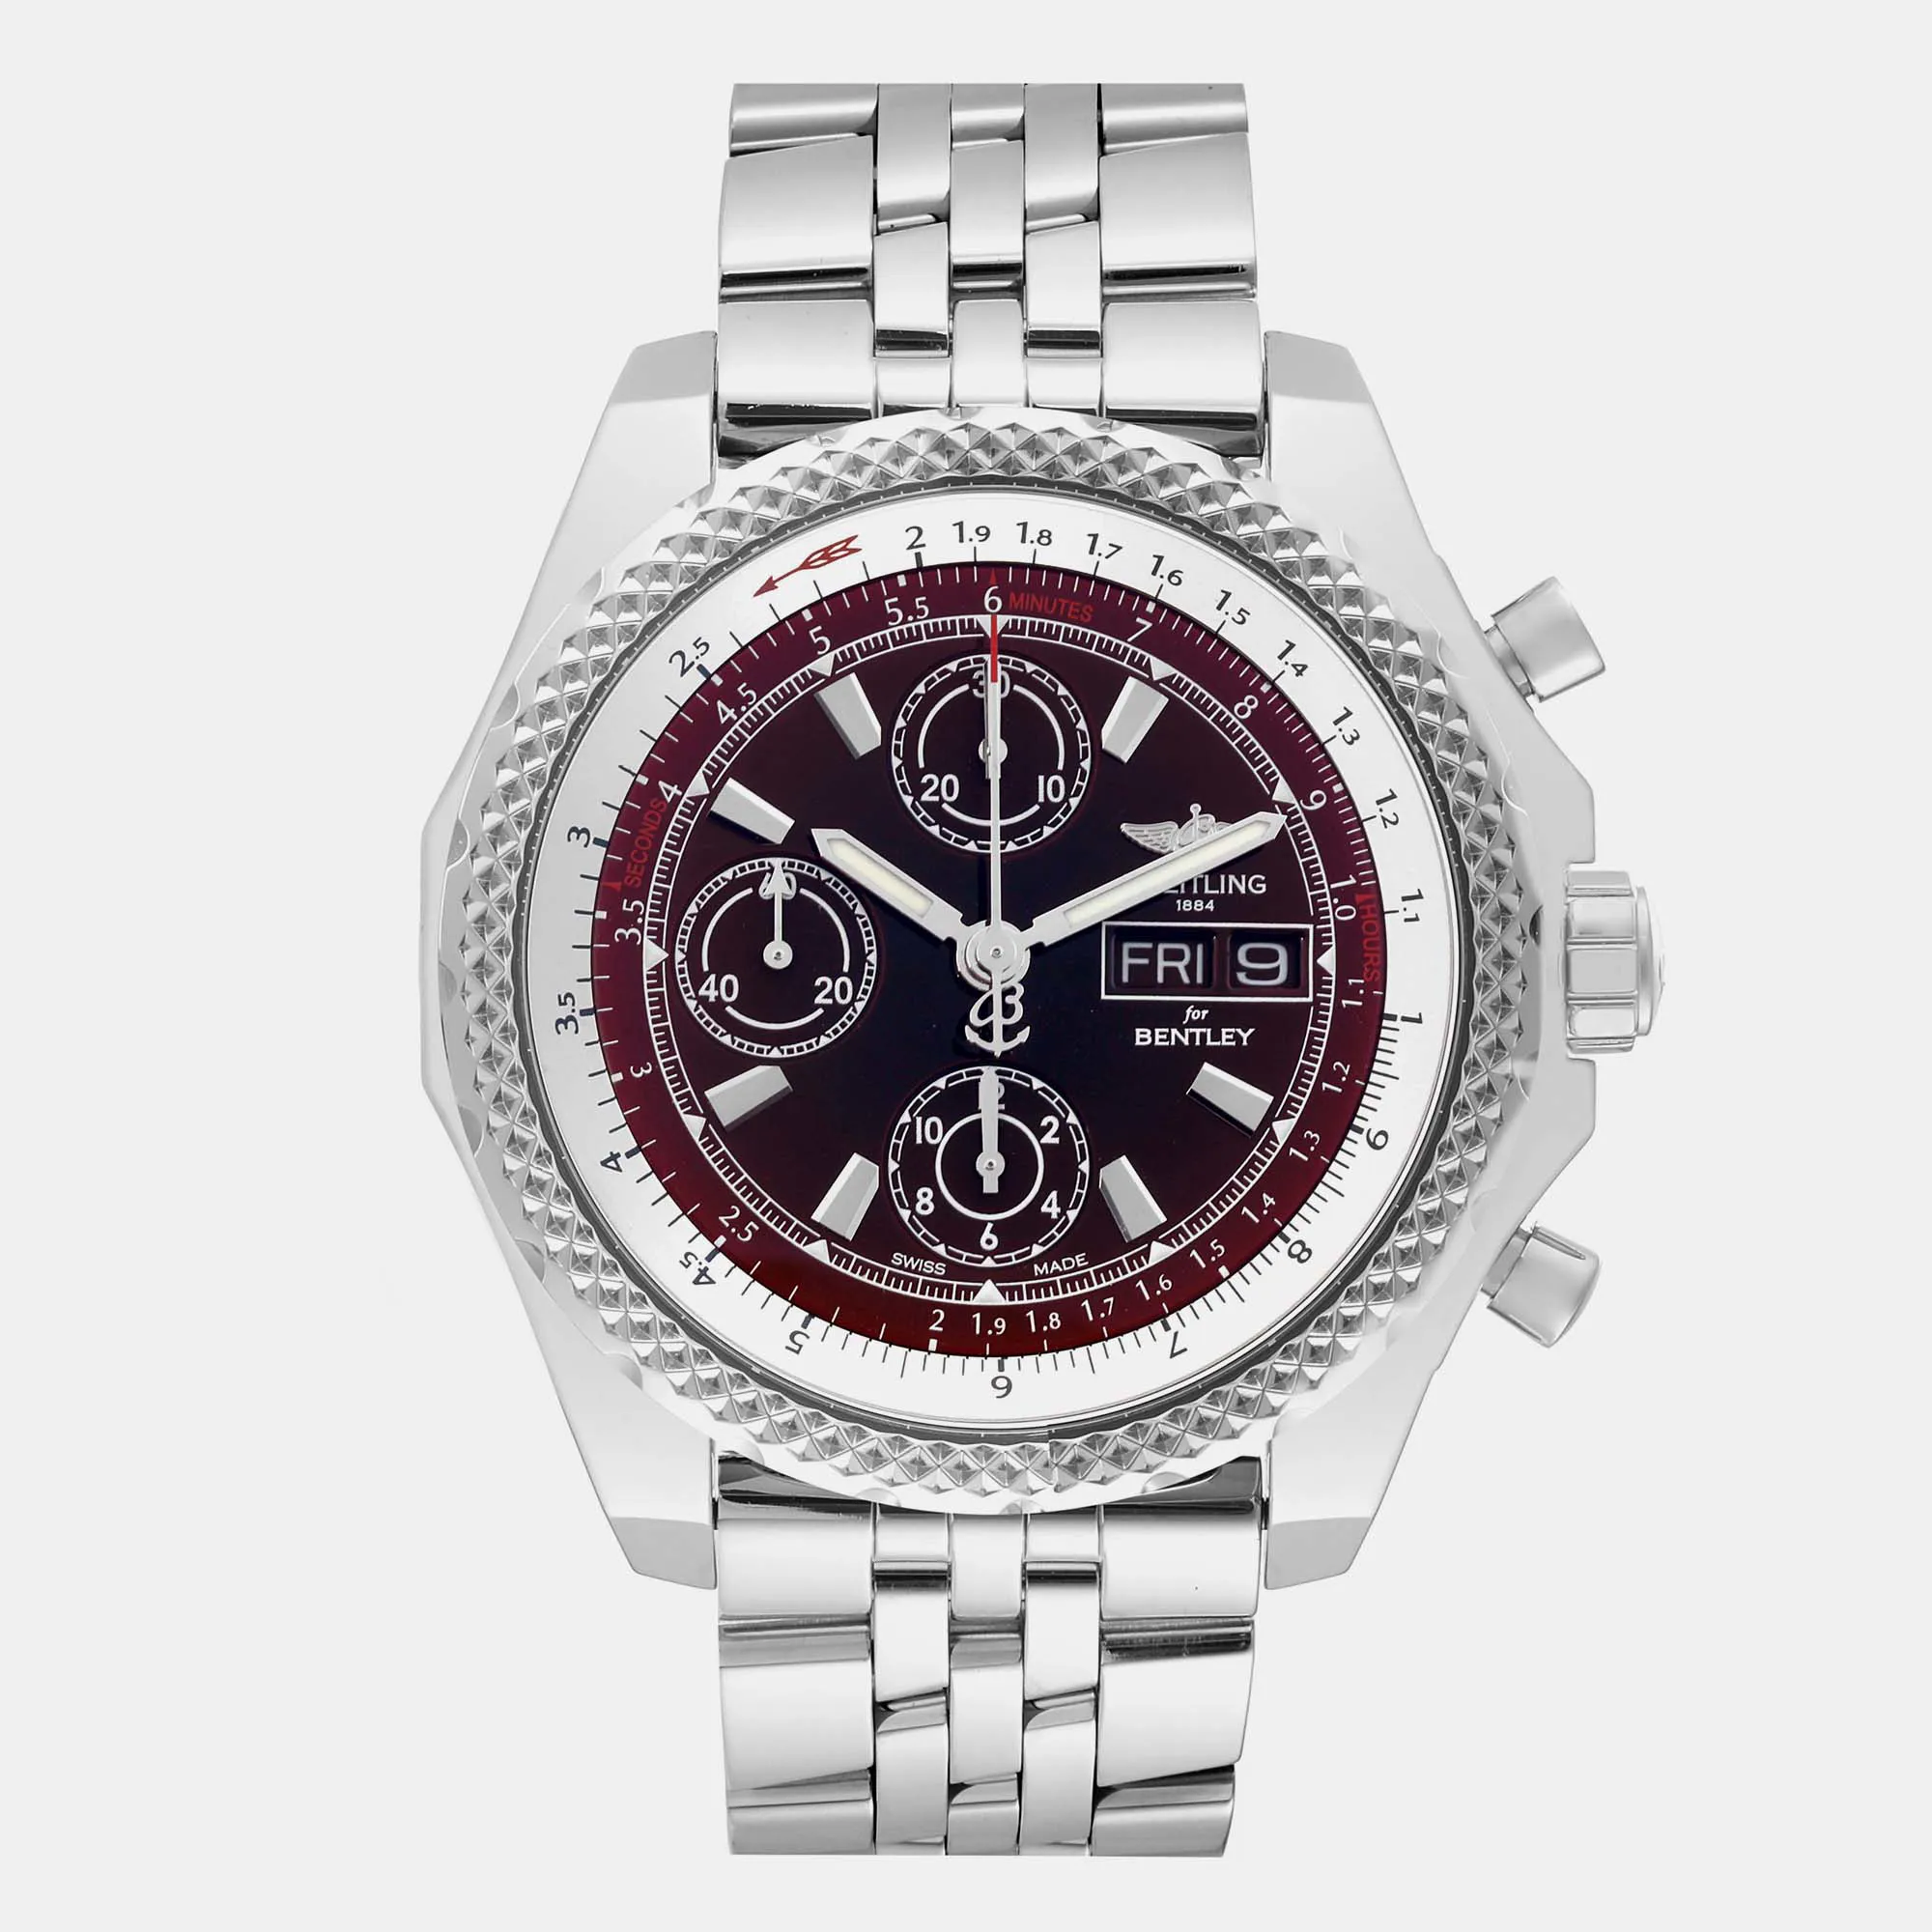 Breitling Bentley A13365 45mm Stainless steel